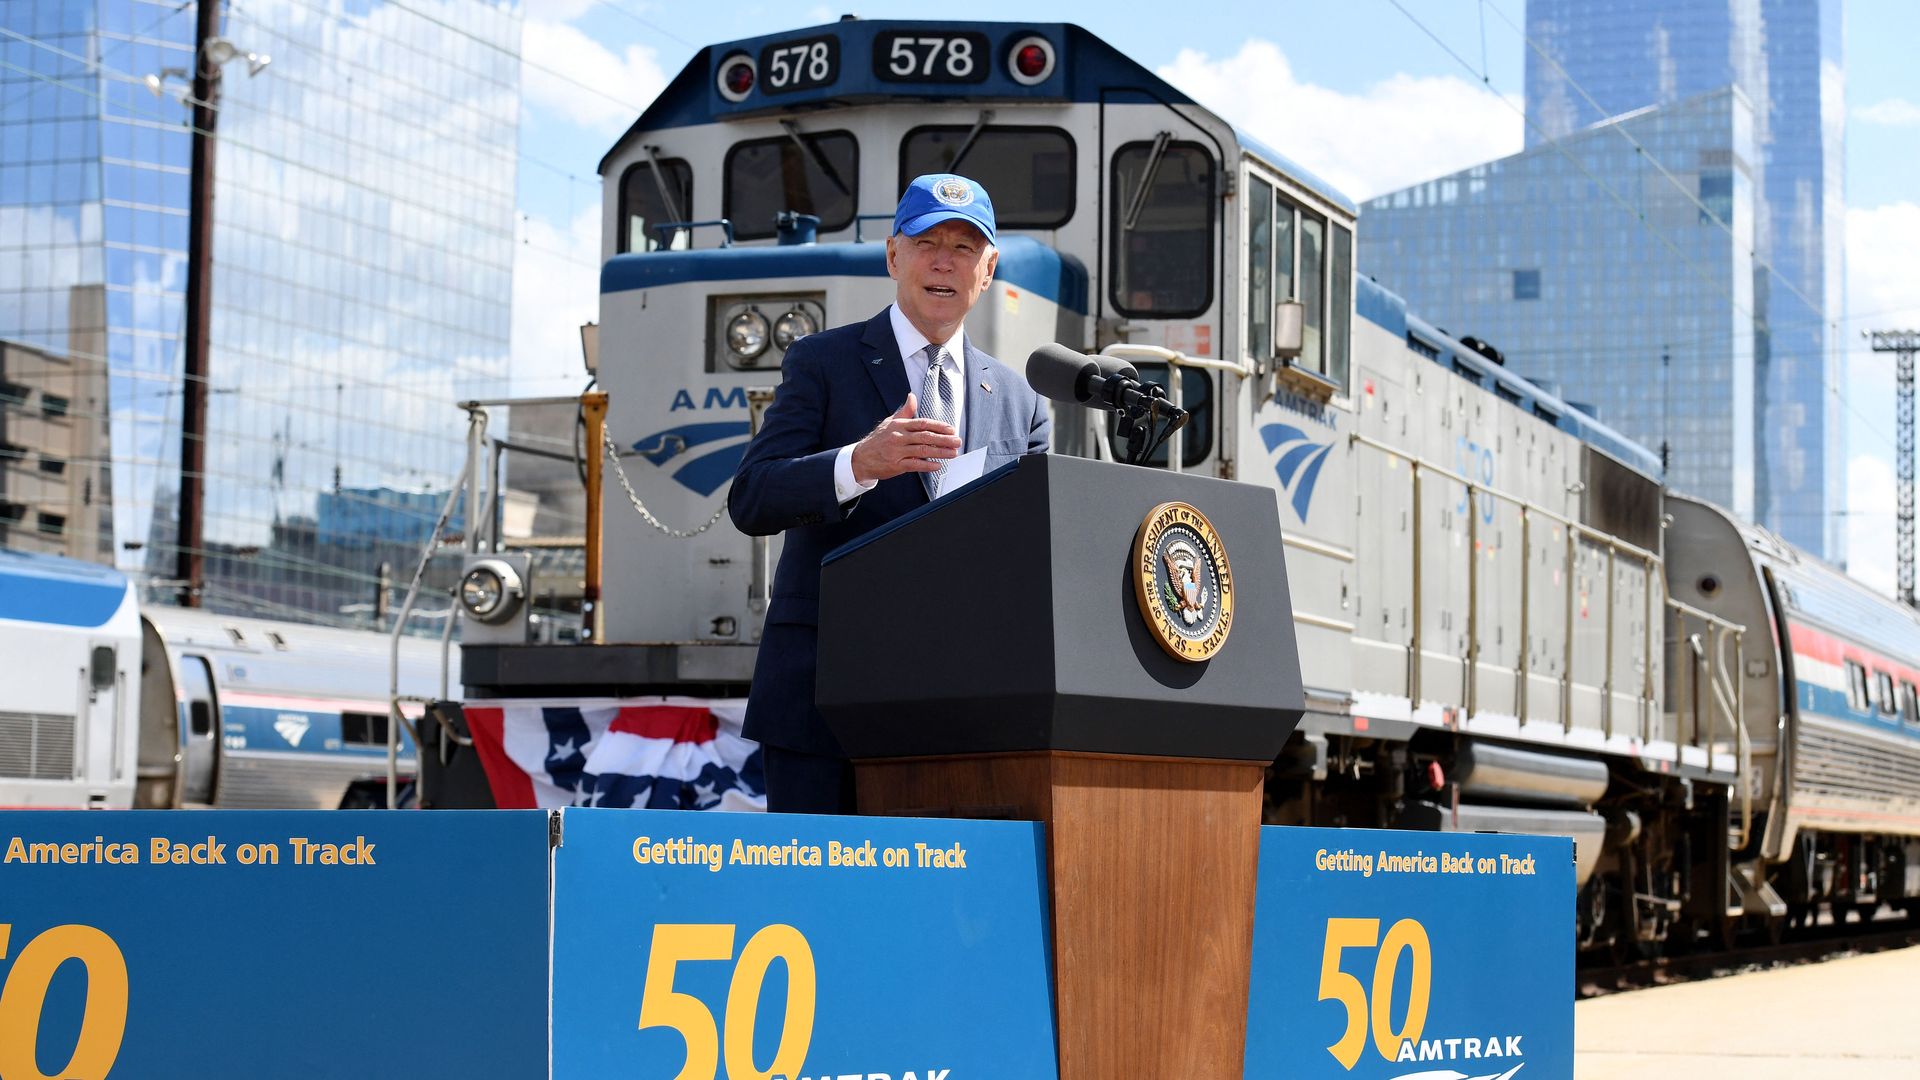 President Biden is seen speaking in front of an Amtrak train engine as he makes the pitch for his infrastructure proposal.